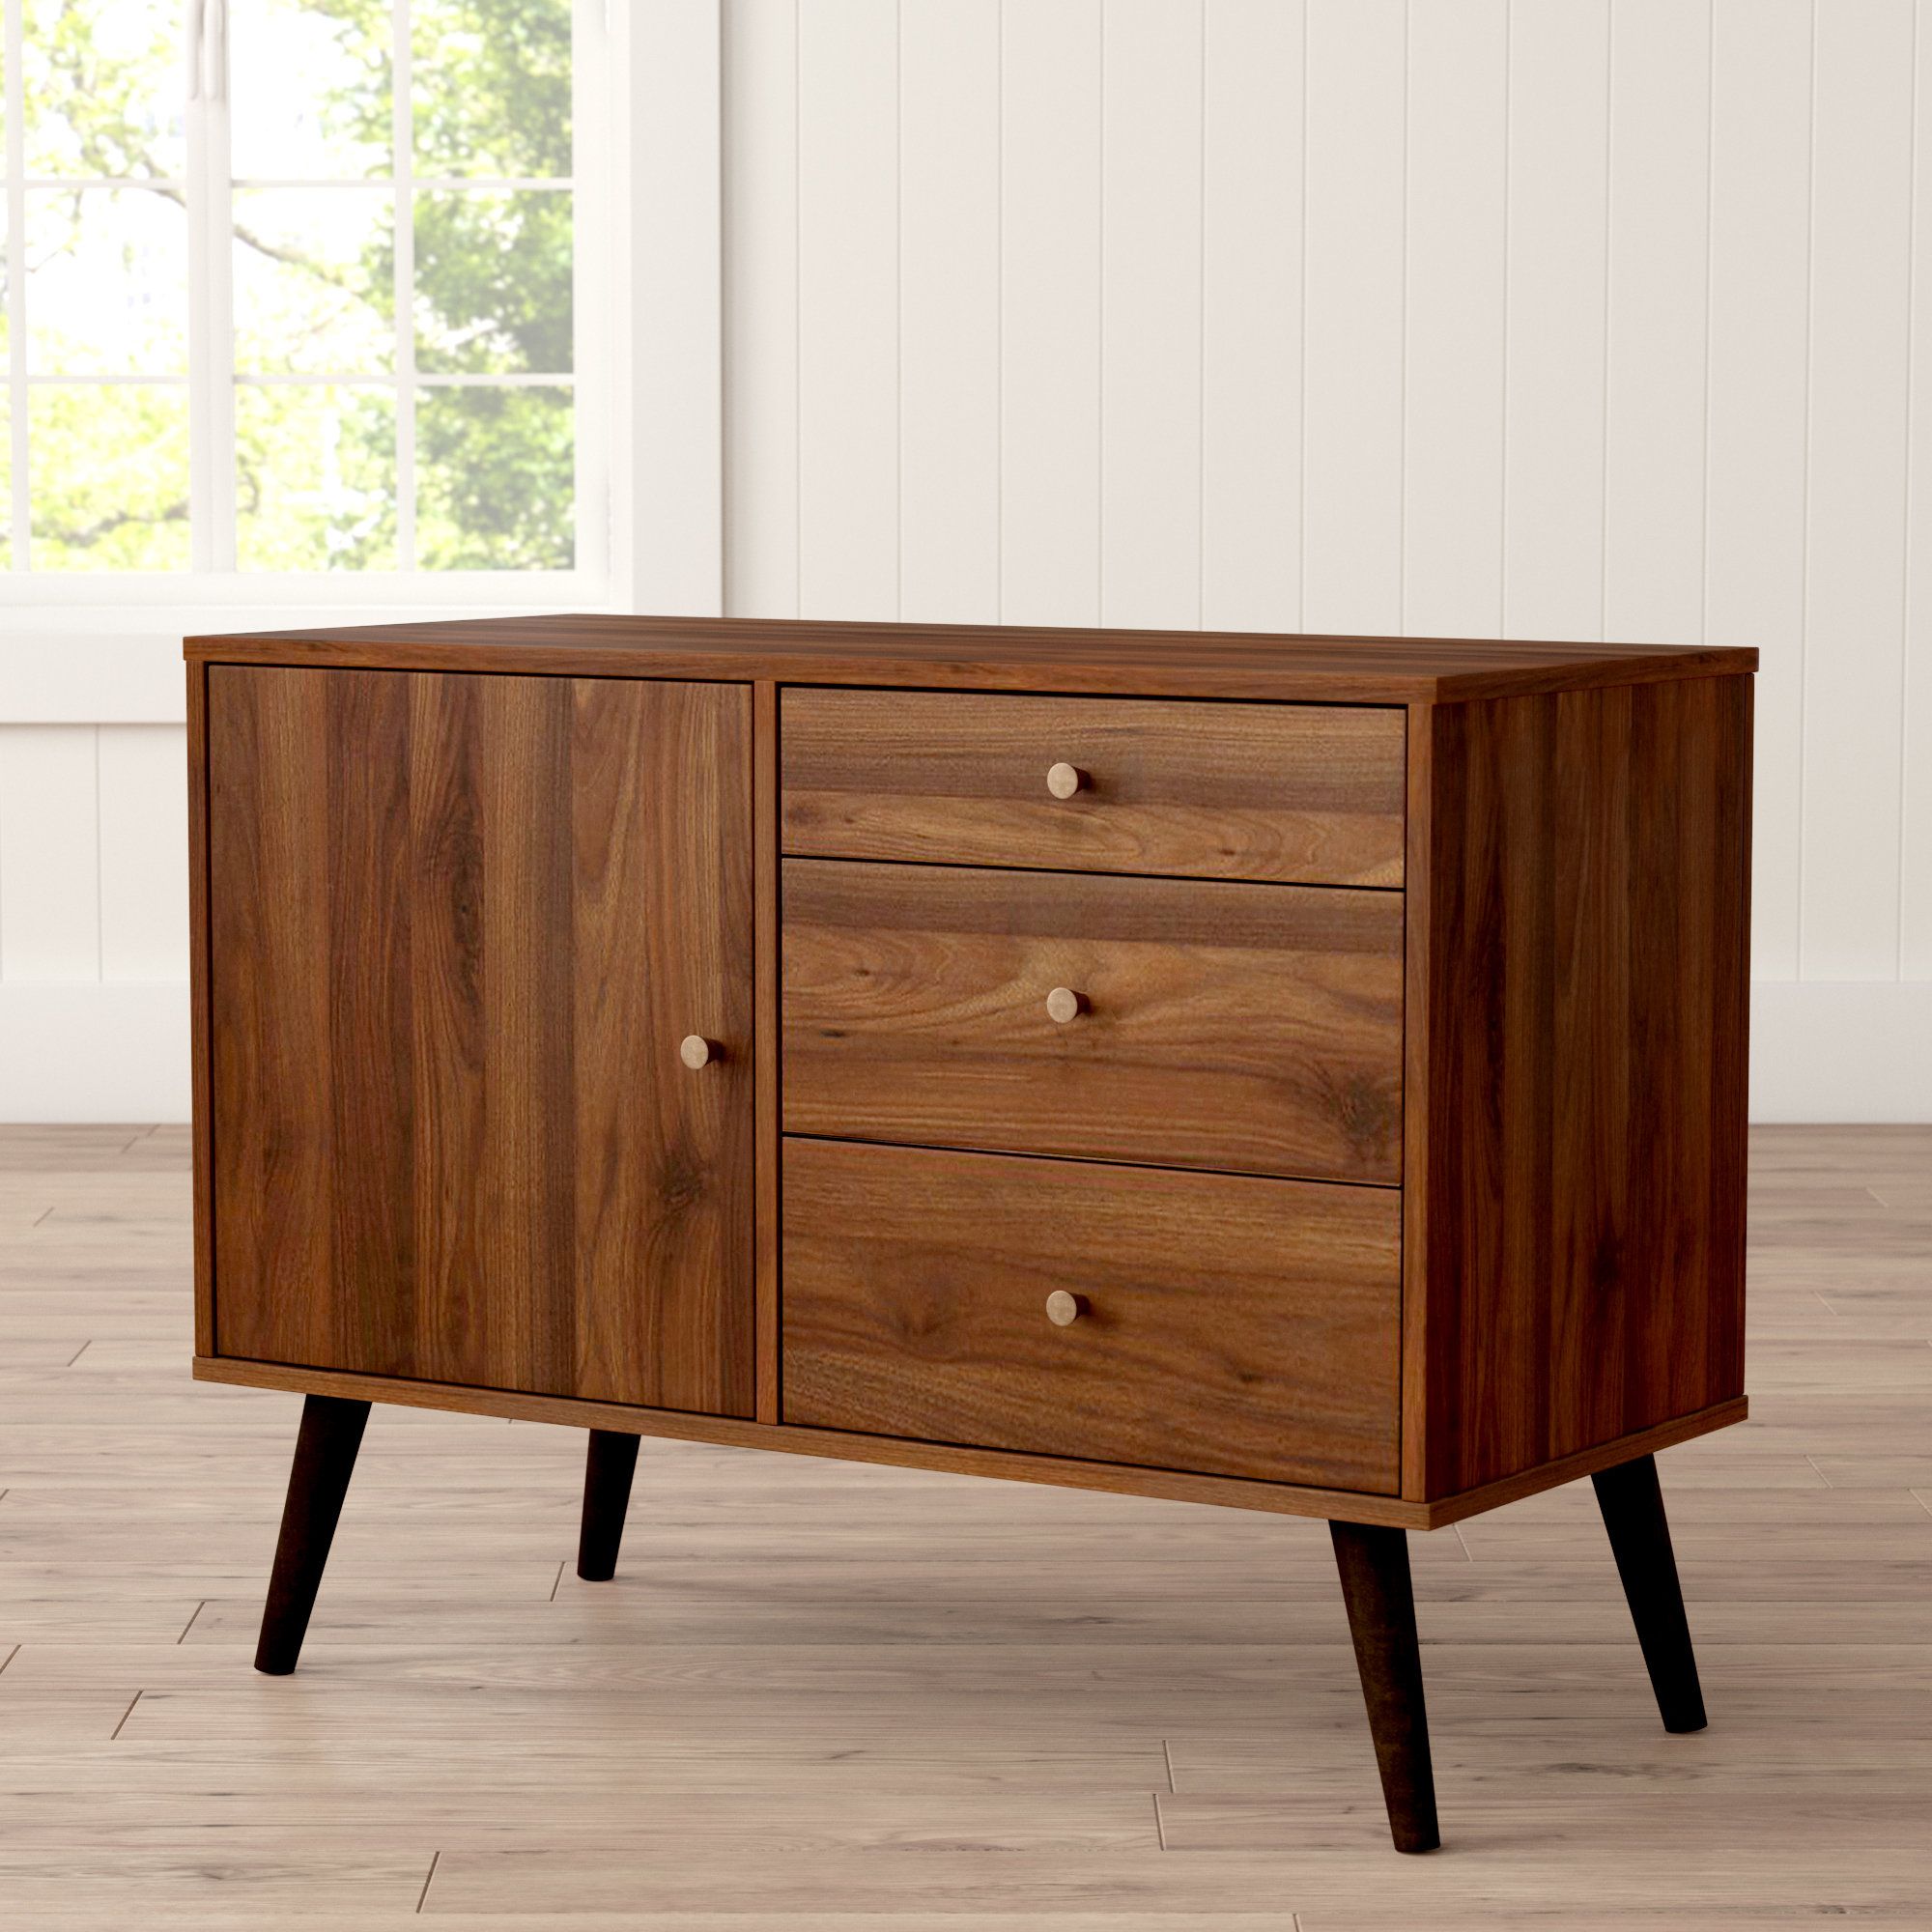 Farmhouse & Rustic Brown Sideboards & Buffets | Birch Lane With Regard To Chaffins Sideboards (View 18 of 20)